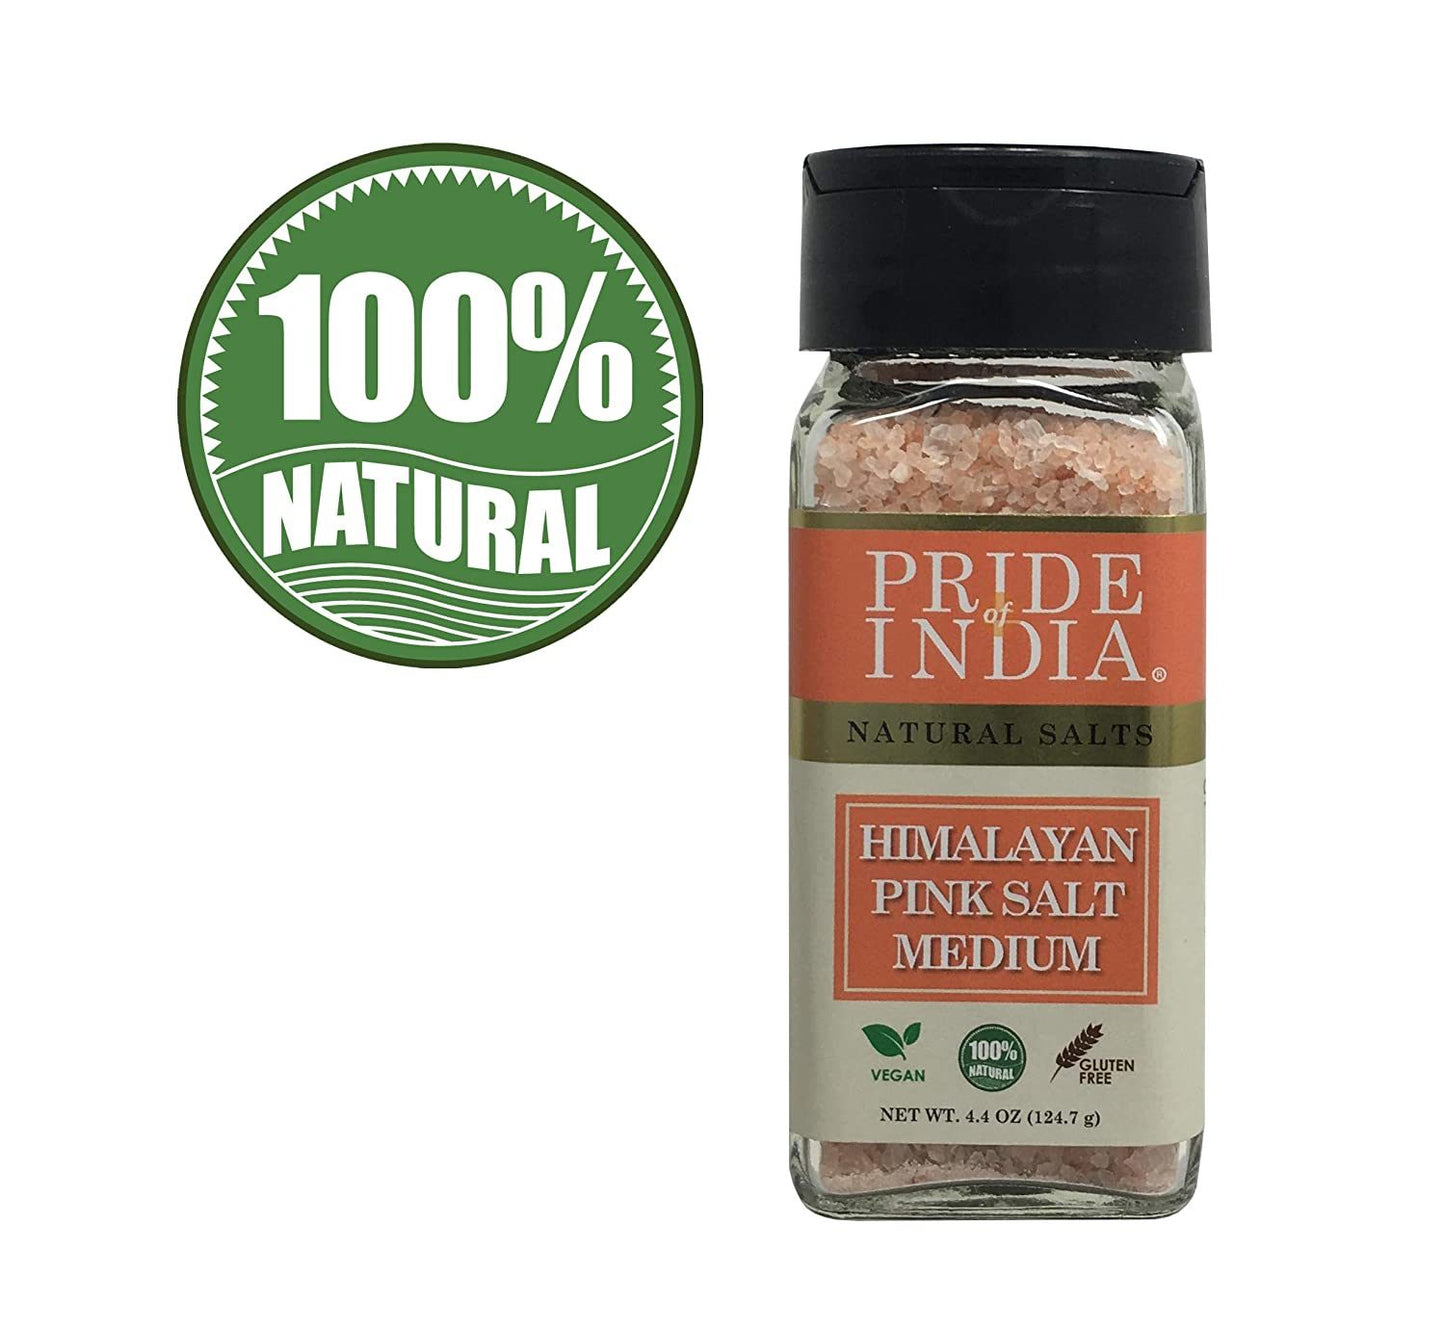 Pride Of India - Pure Himalayan Pink Salt - Enriched w/ 84+ Natural Minerals, Medium Grind Dual sifter (4.2 oz, 119.1 gm)